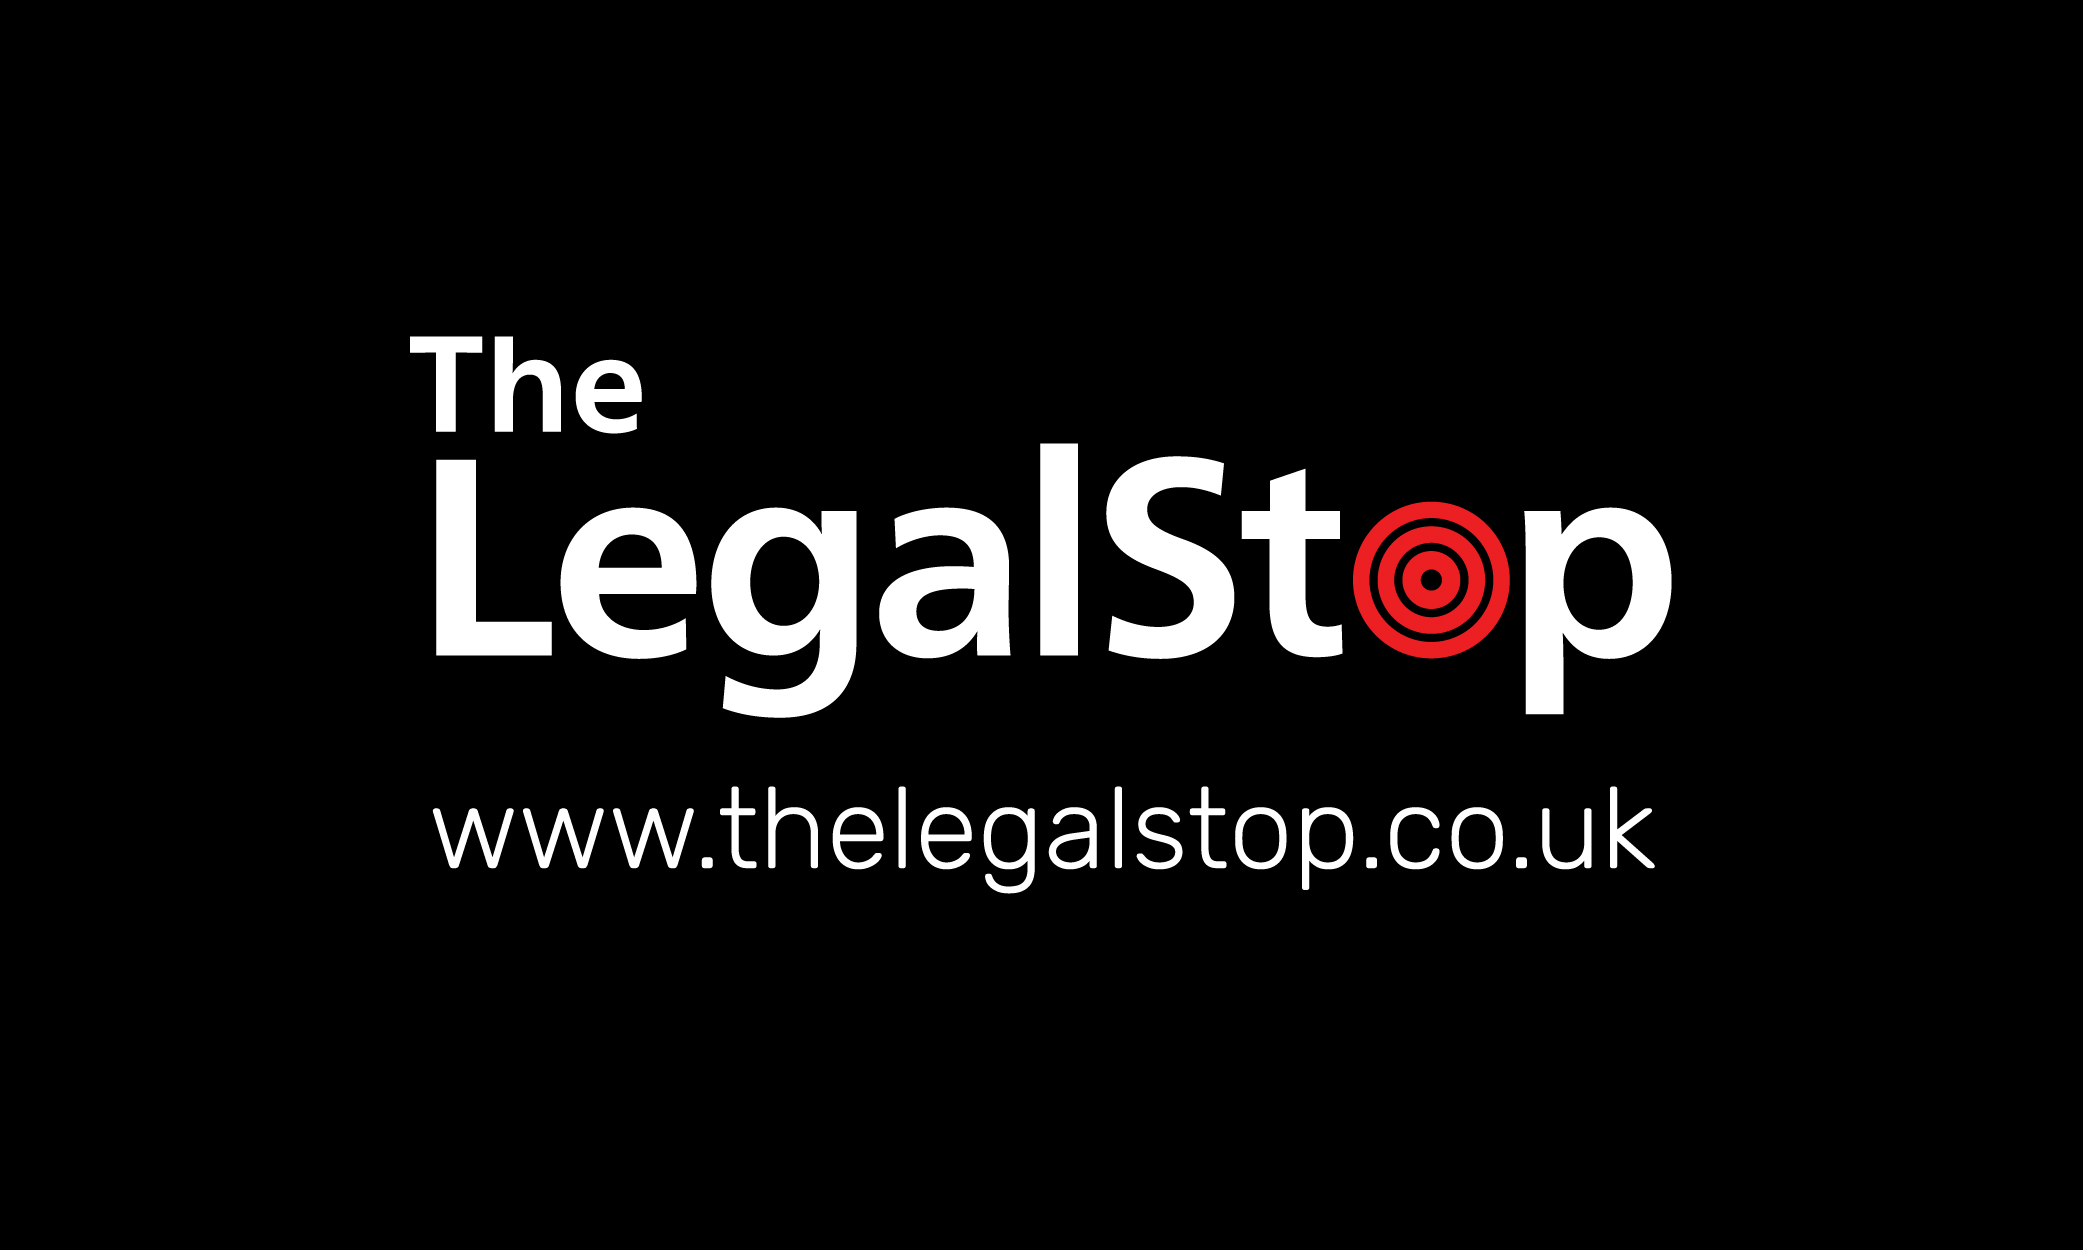 The Legal Stop Limited